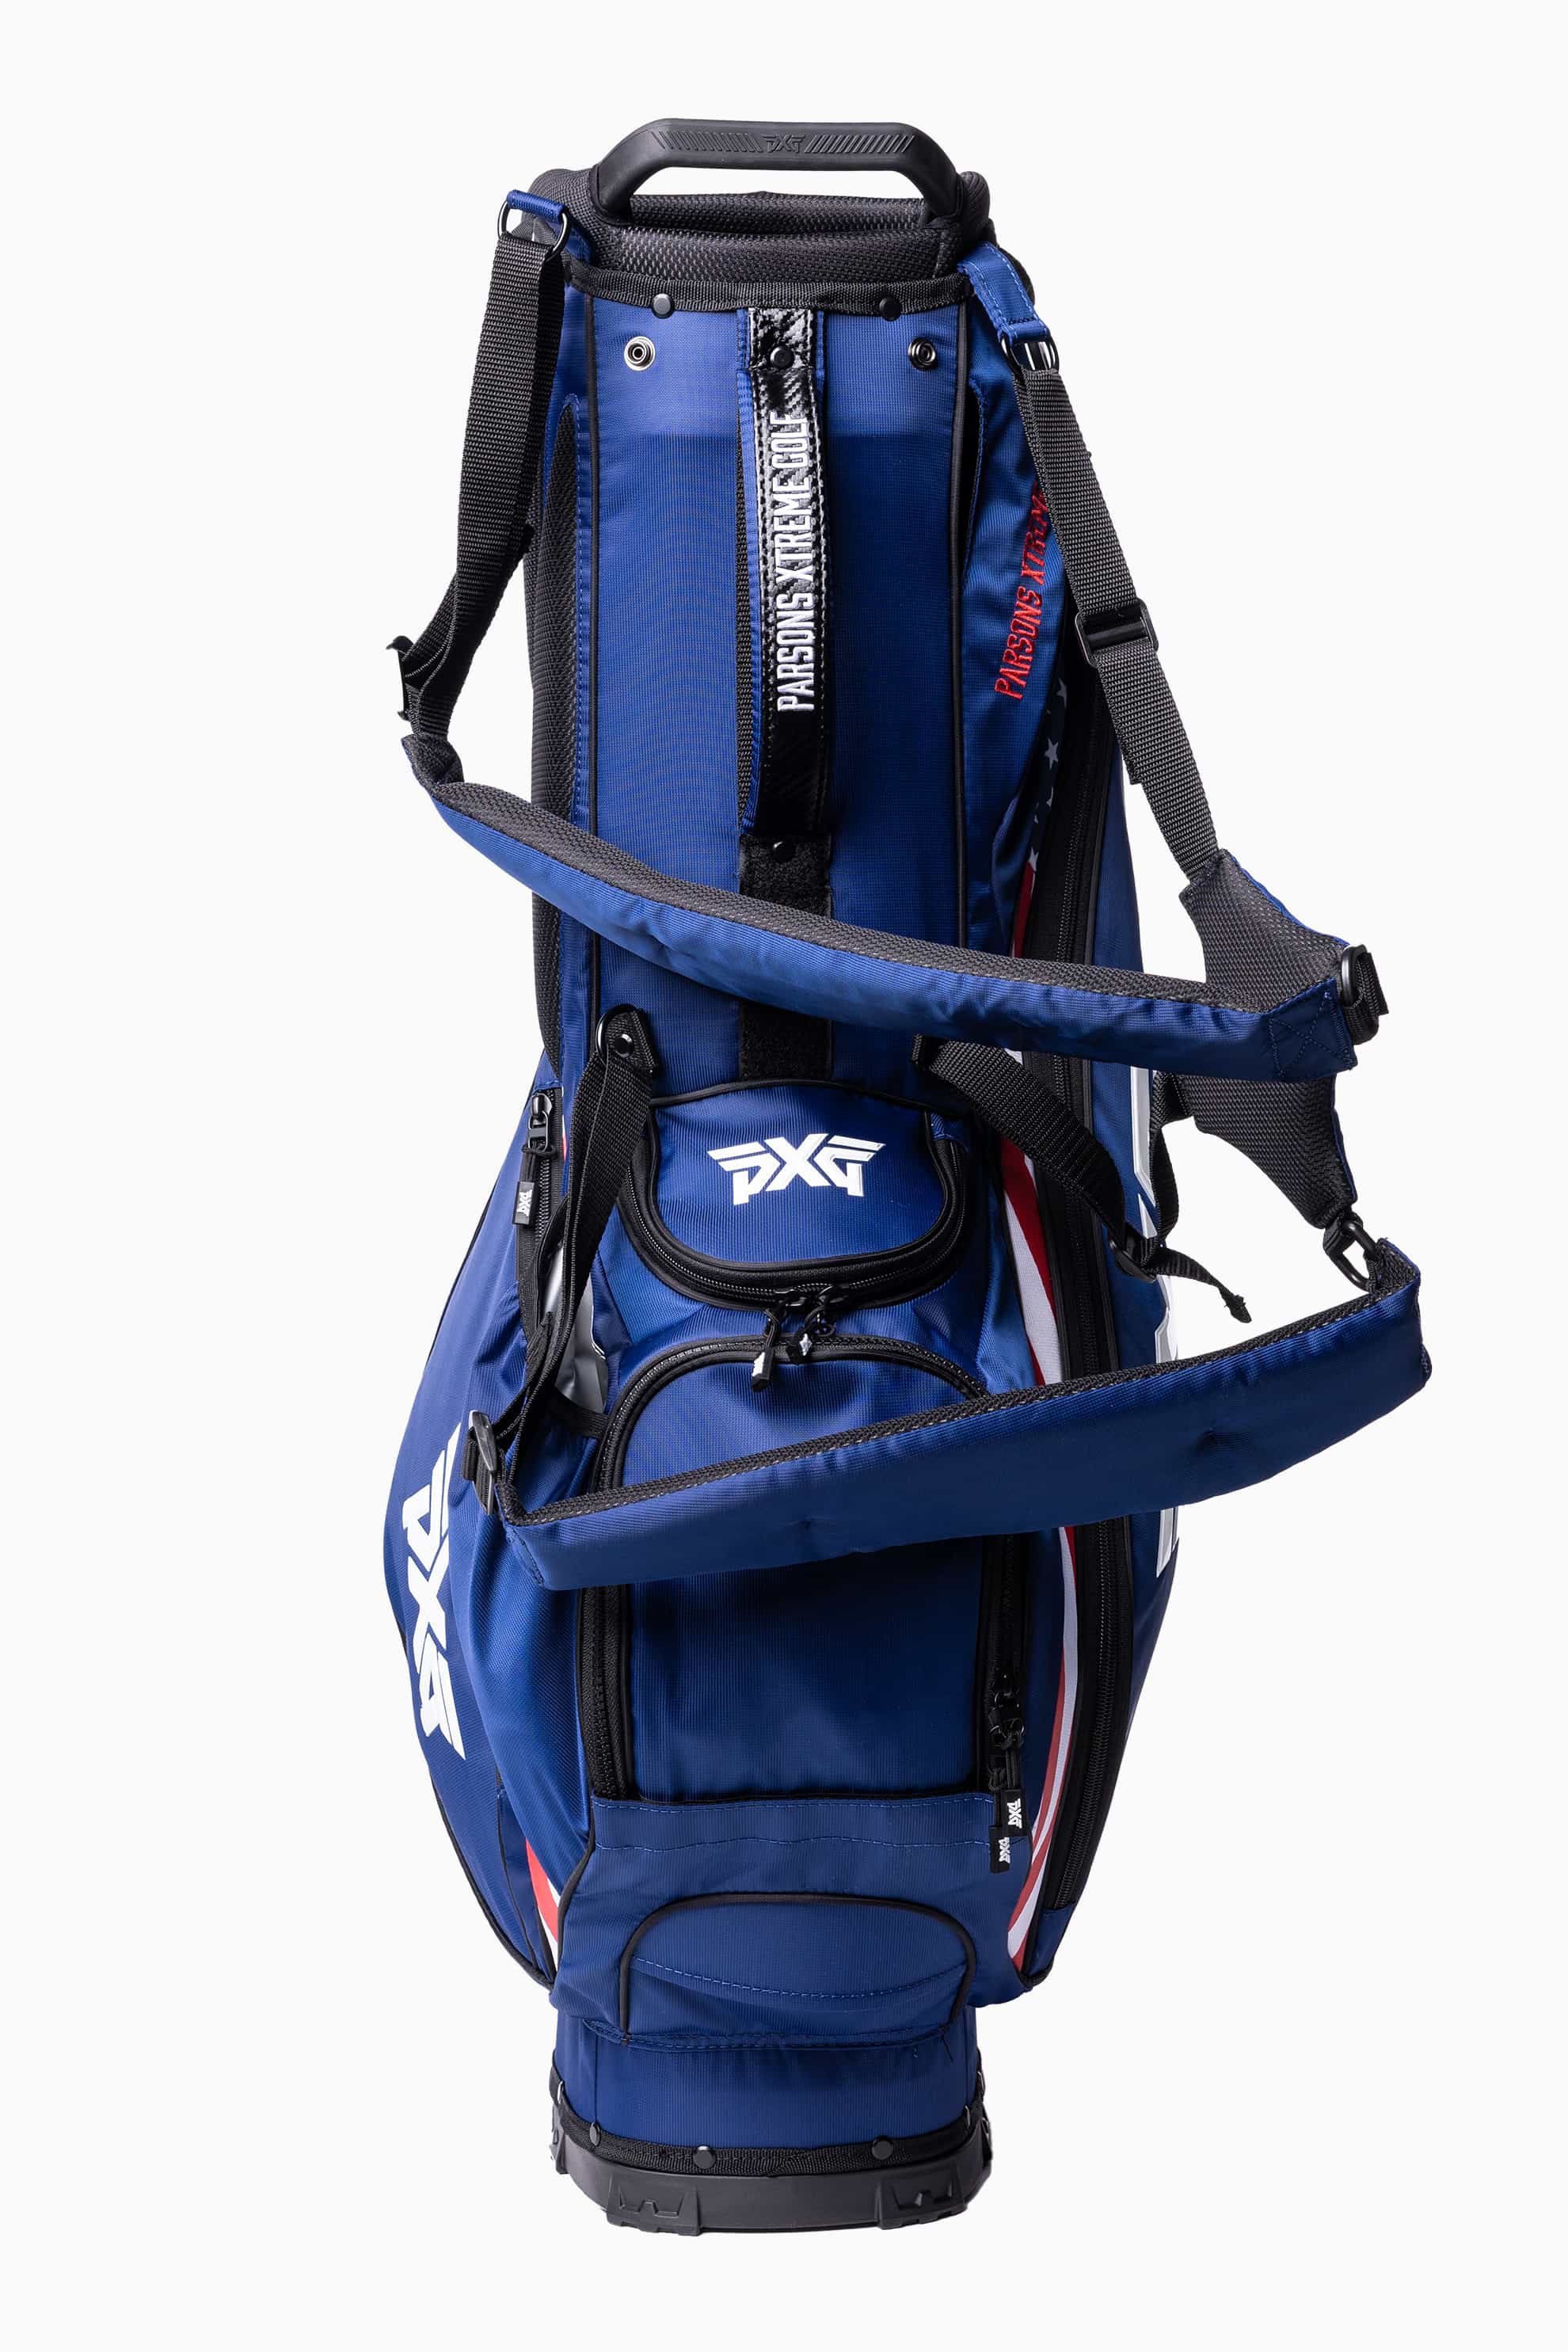 Buy Stars & Stripes Lightweight Carry Stand Bag | PXG Canada